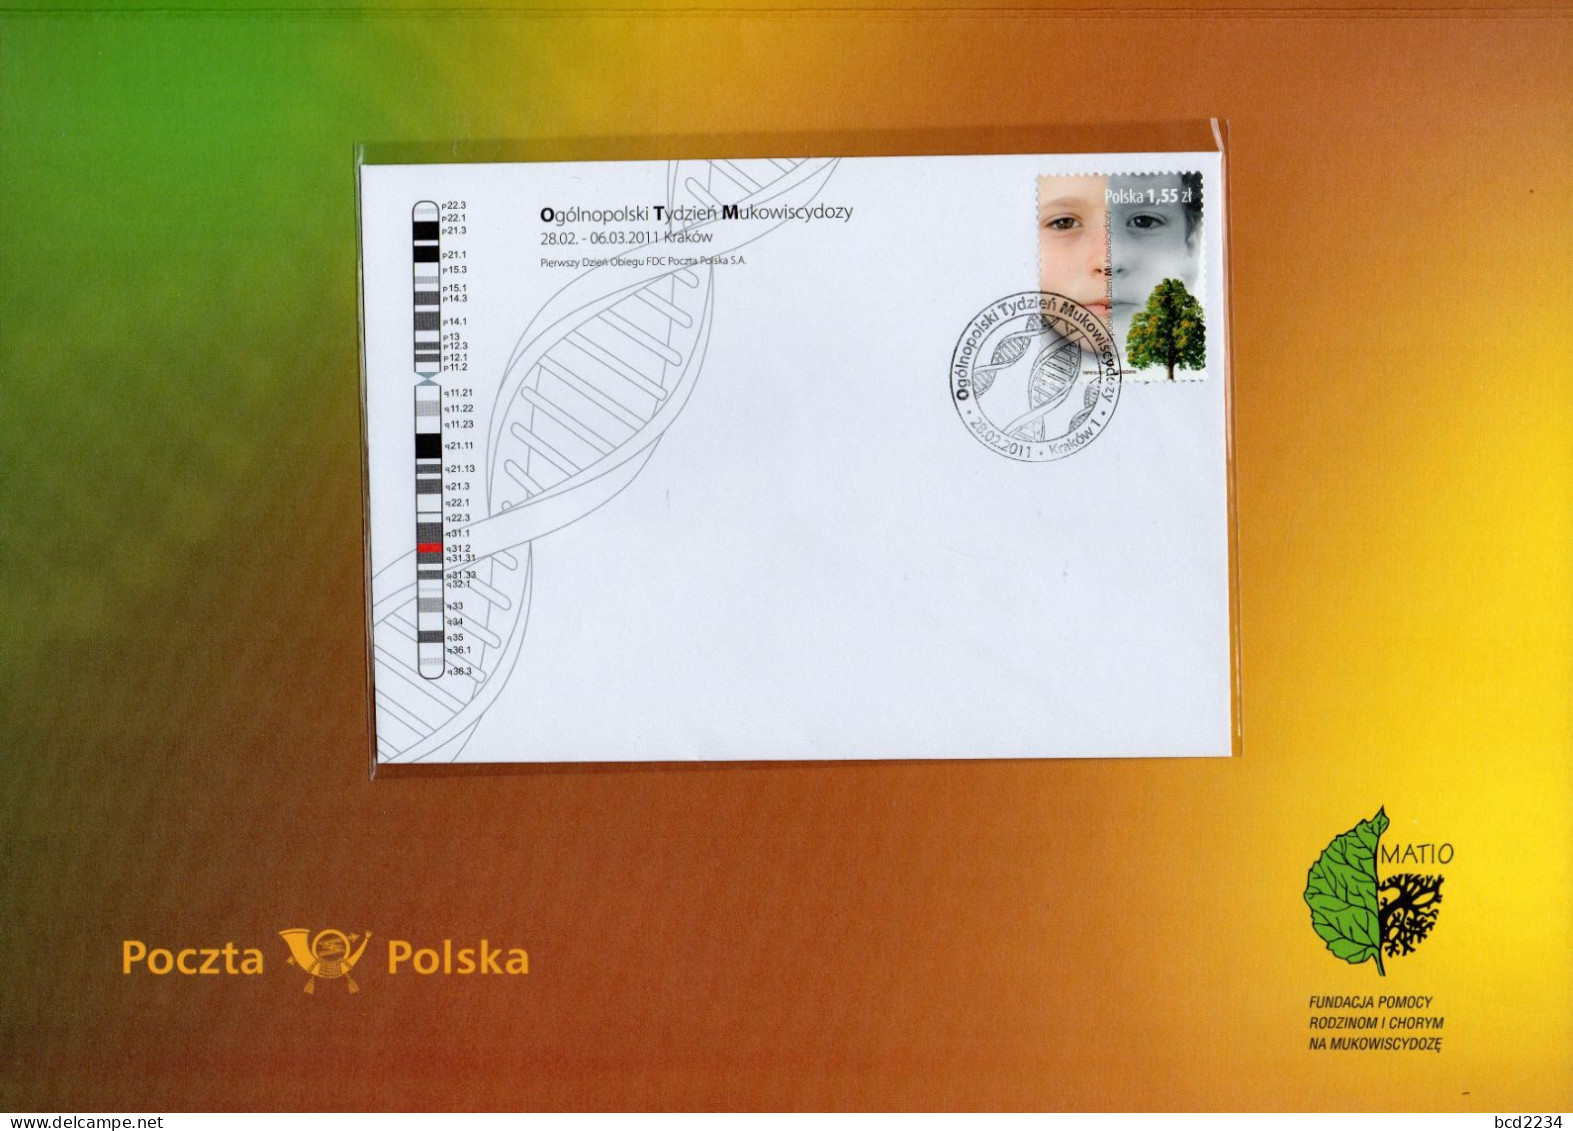 POLAND 2011 SPECIAL LIMITED EDITION PHILATELIC FOLDER: POLISH NATIONAL CYSTIC FIBROSIS WEEK FDC GENETIC DISORDER DISEASE - FDC